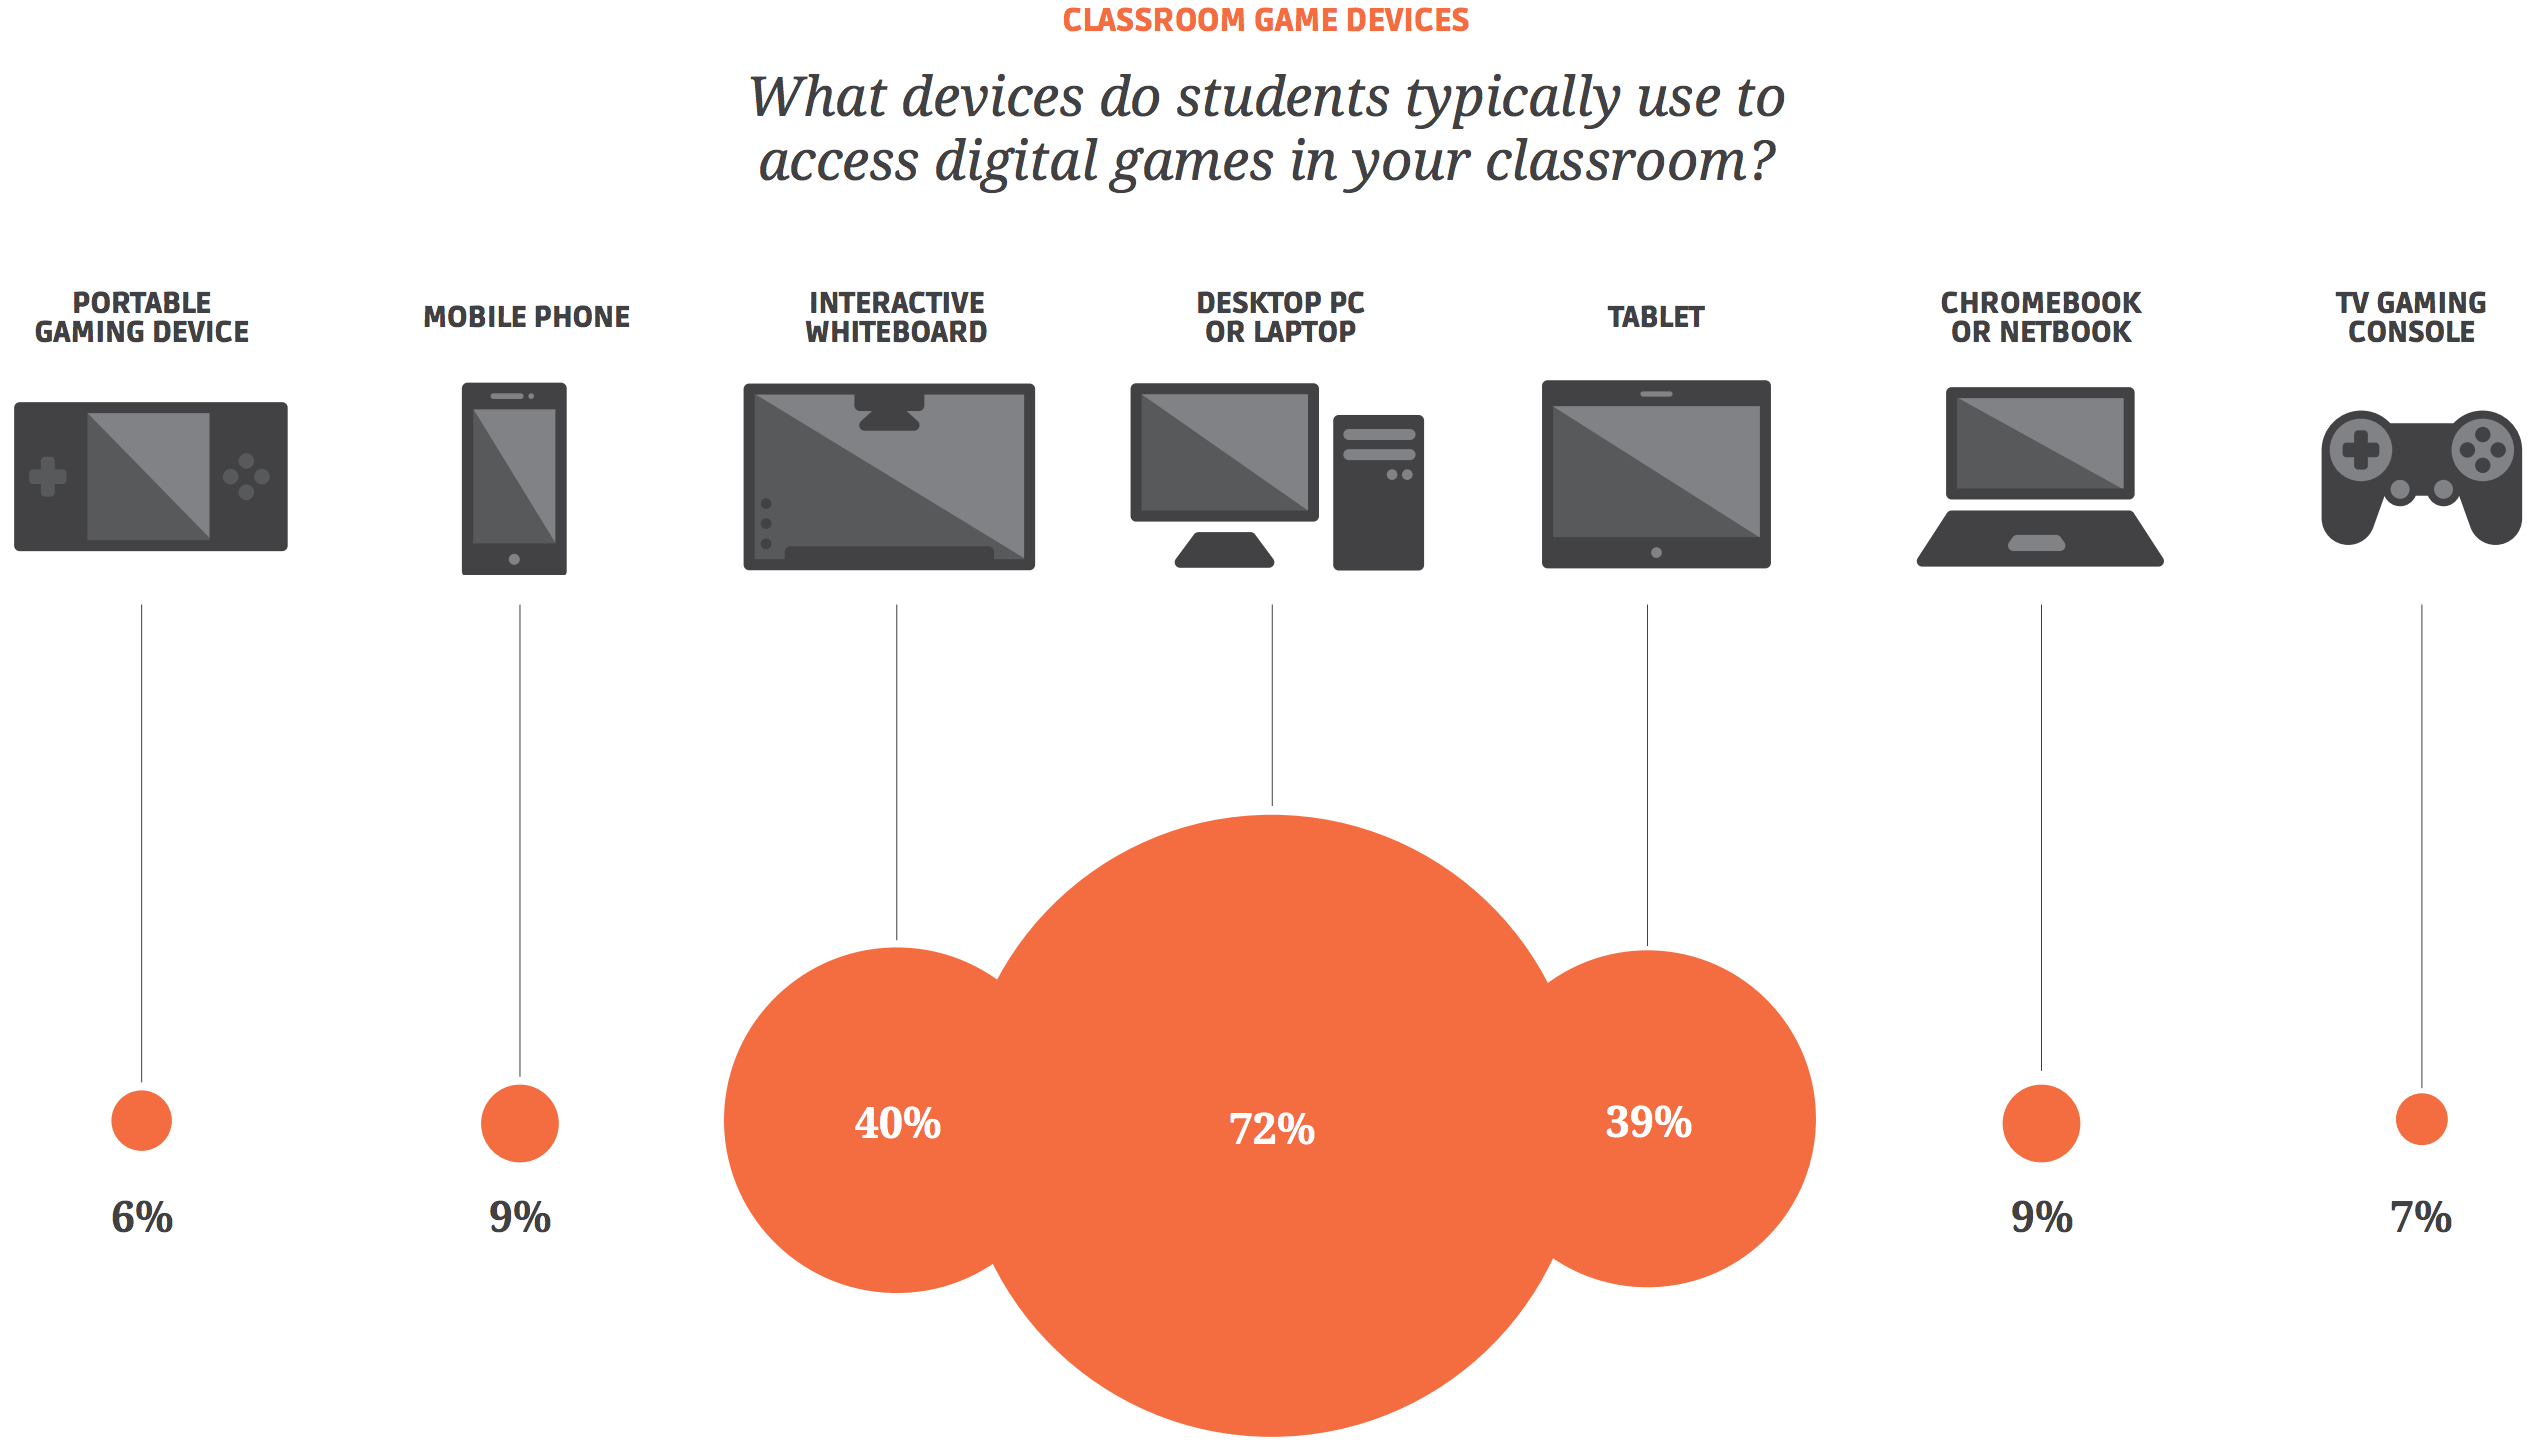 PCs are widely used in classrooms for gaming according to the report